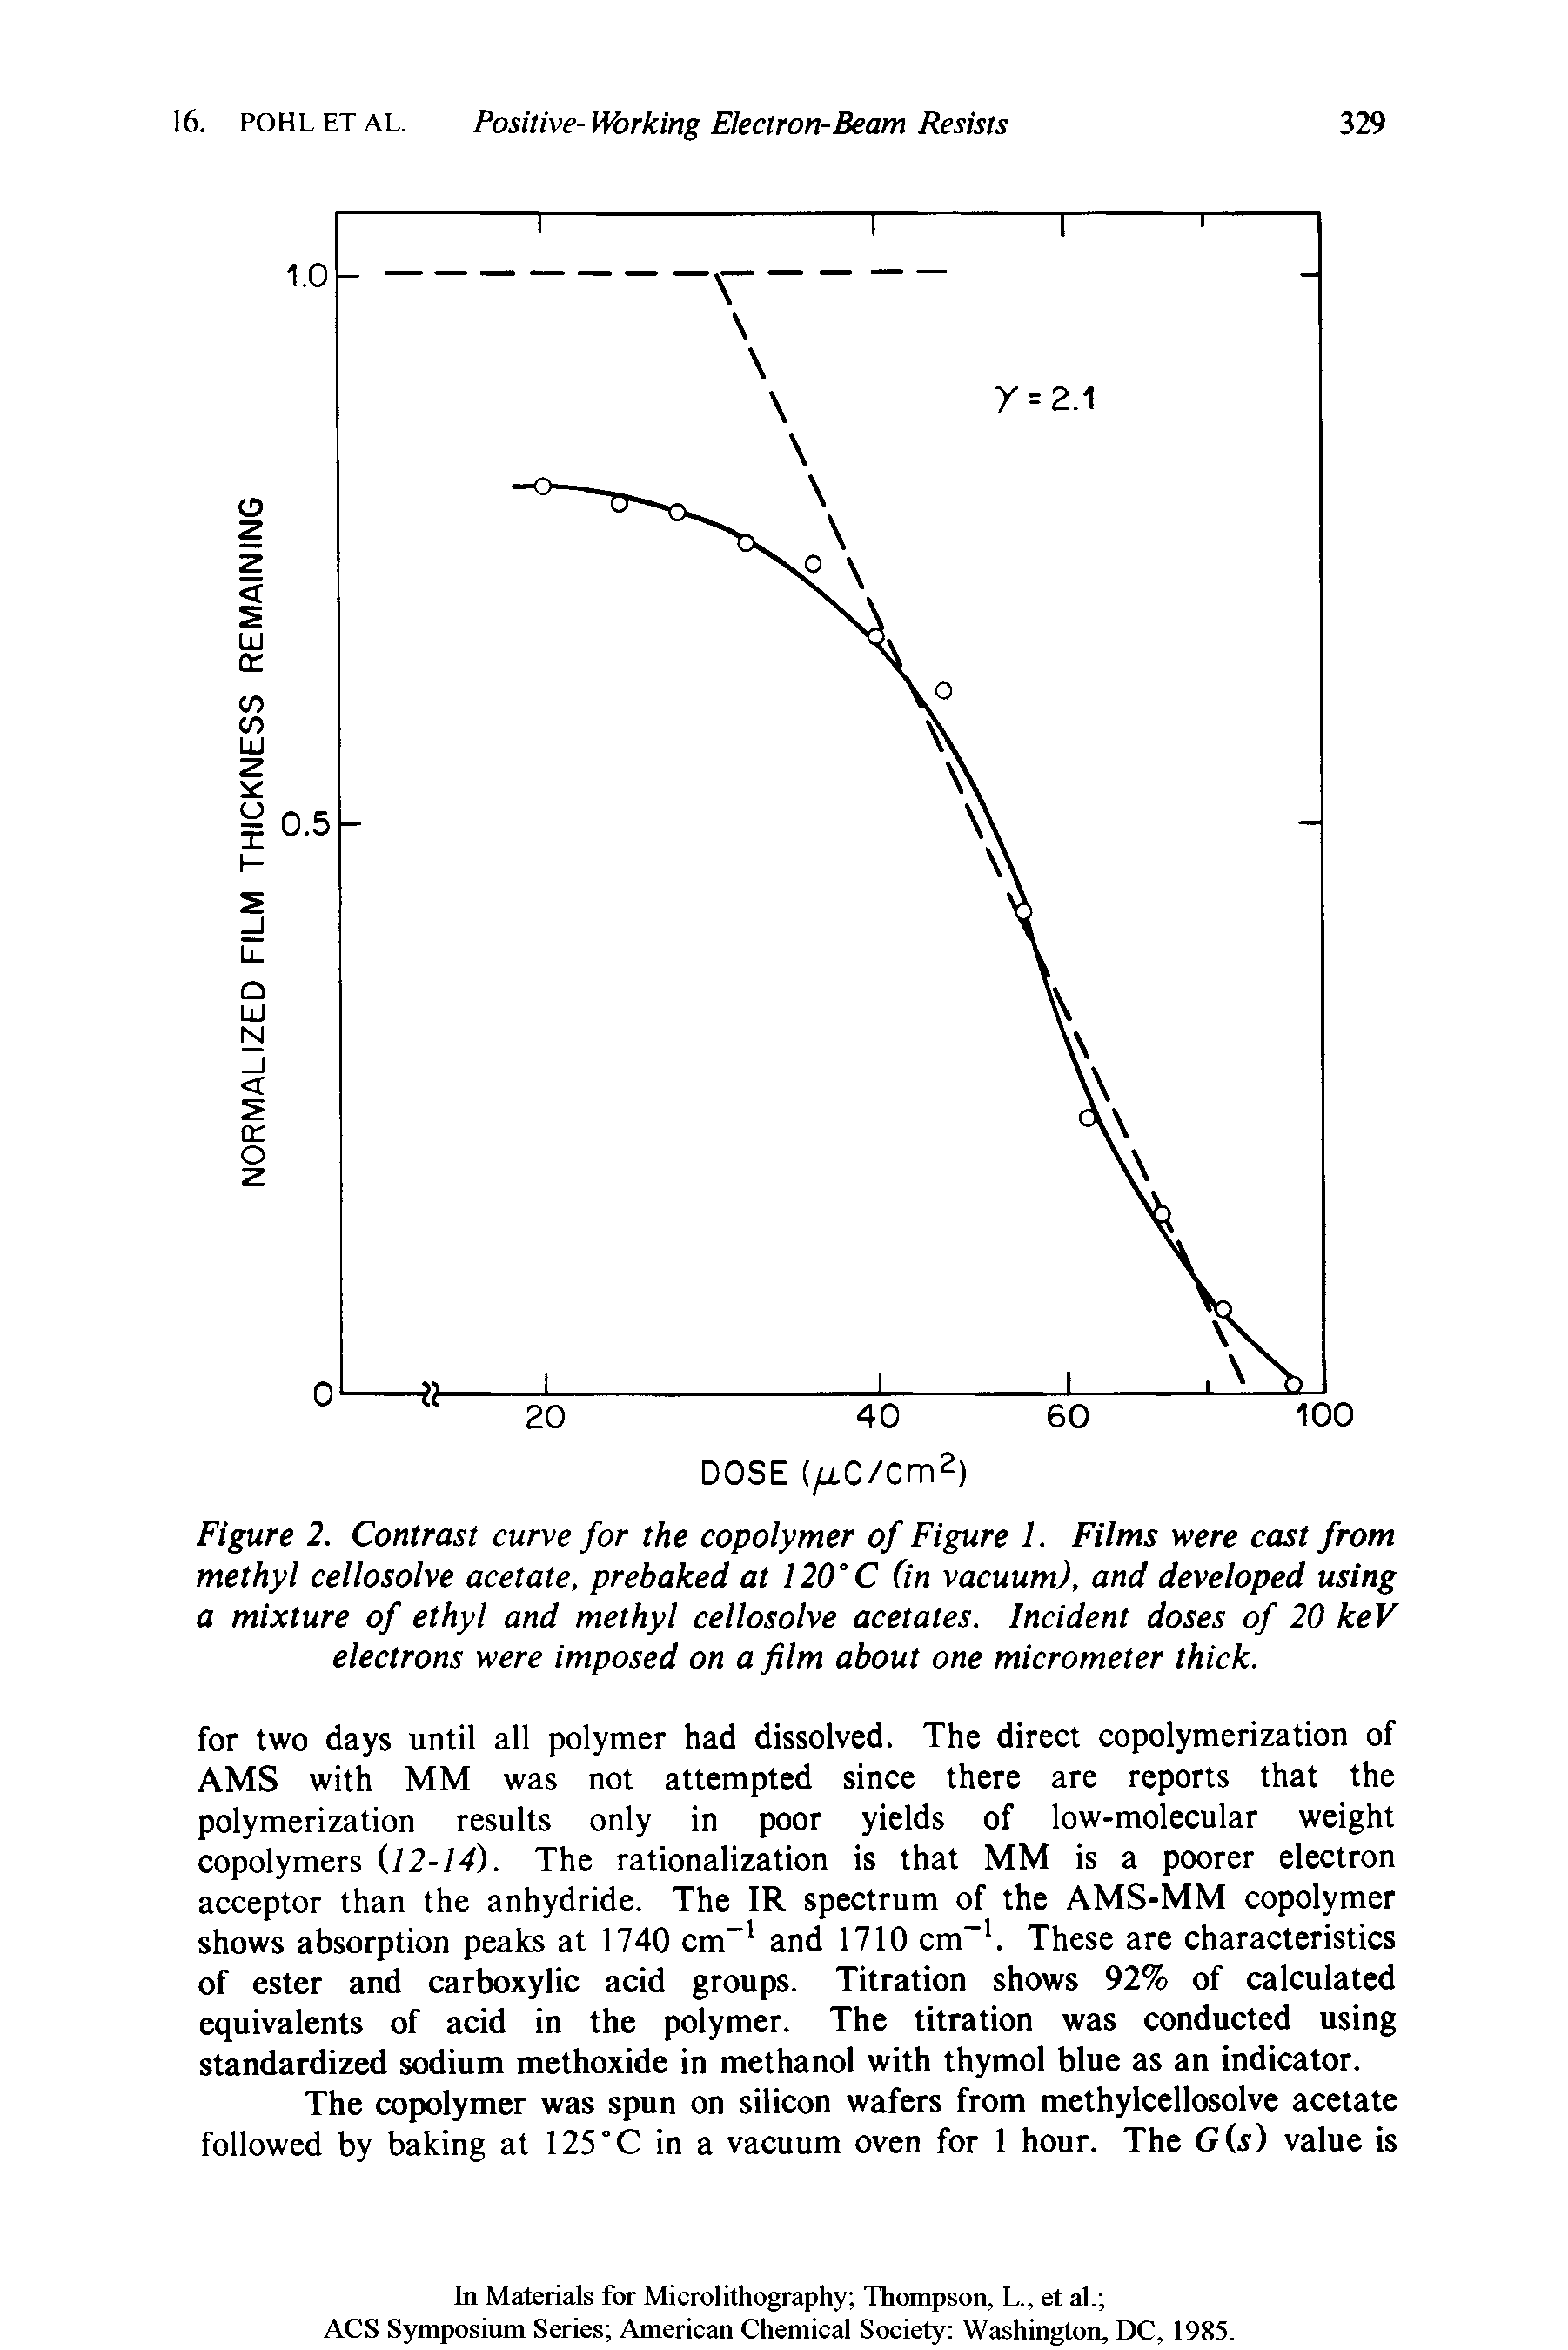 Figure 2. Contrast curve for the copolymer of Figure 1. Films were cast from methyl cellosolve acetate, prebaked at 120°C (in vacuum), and developed using a mixture of ethyl and methyl cellosolve acetates. Incident doses of 20 keV electrons were imposed on a film about one micrometer thick.